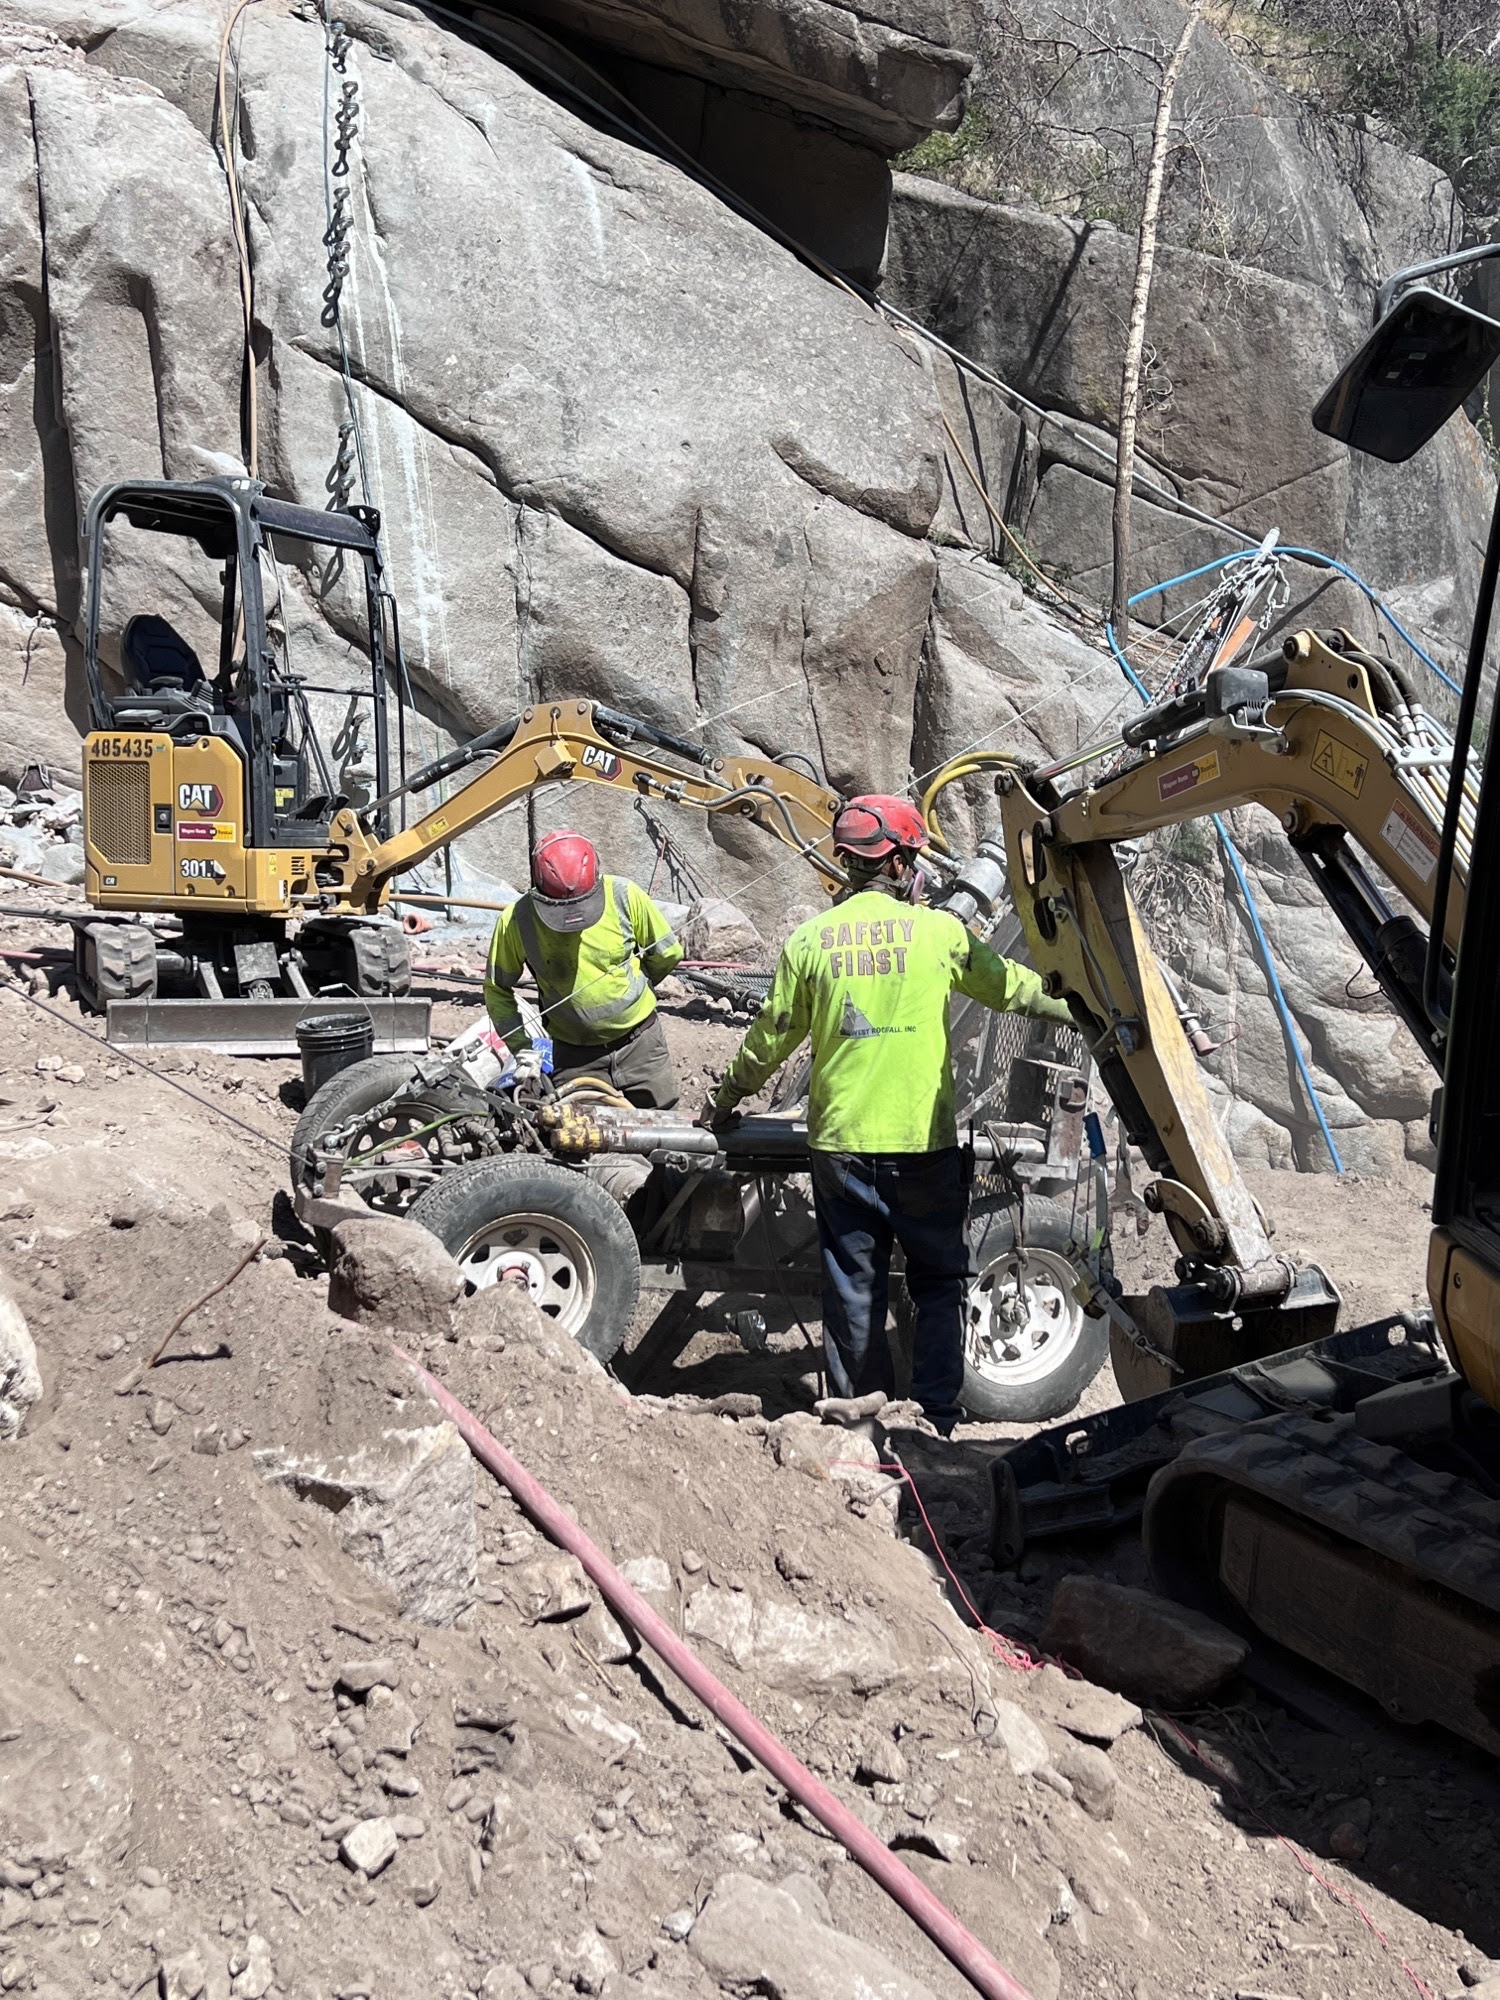 Crews preparing equipment to haul up the side of a rockface.jpg detail image